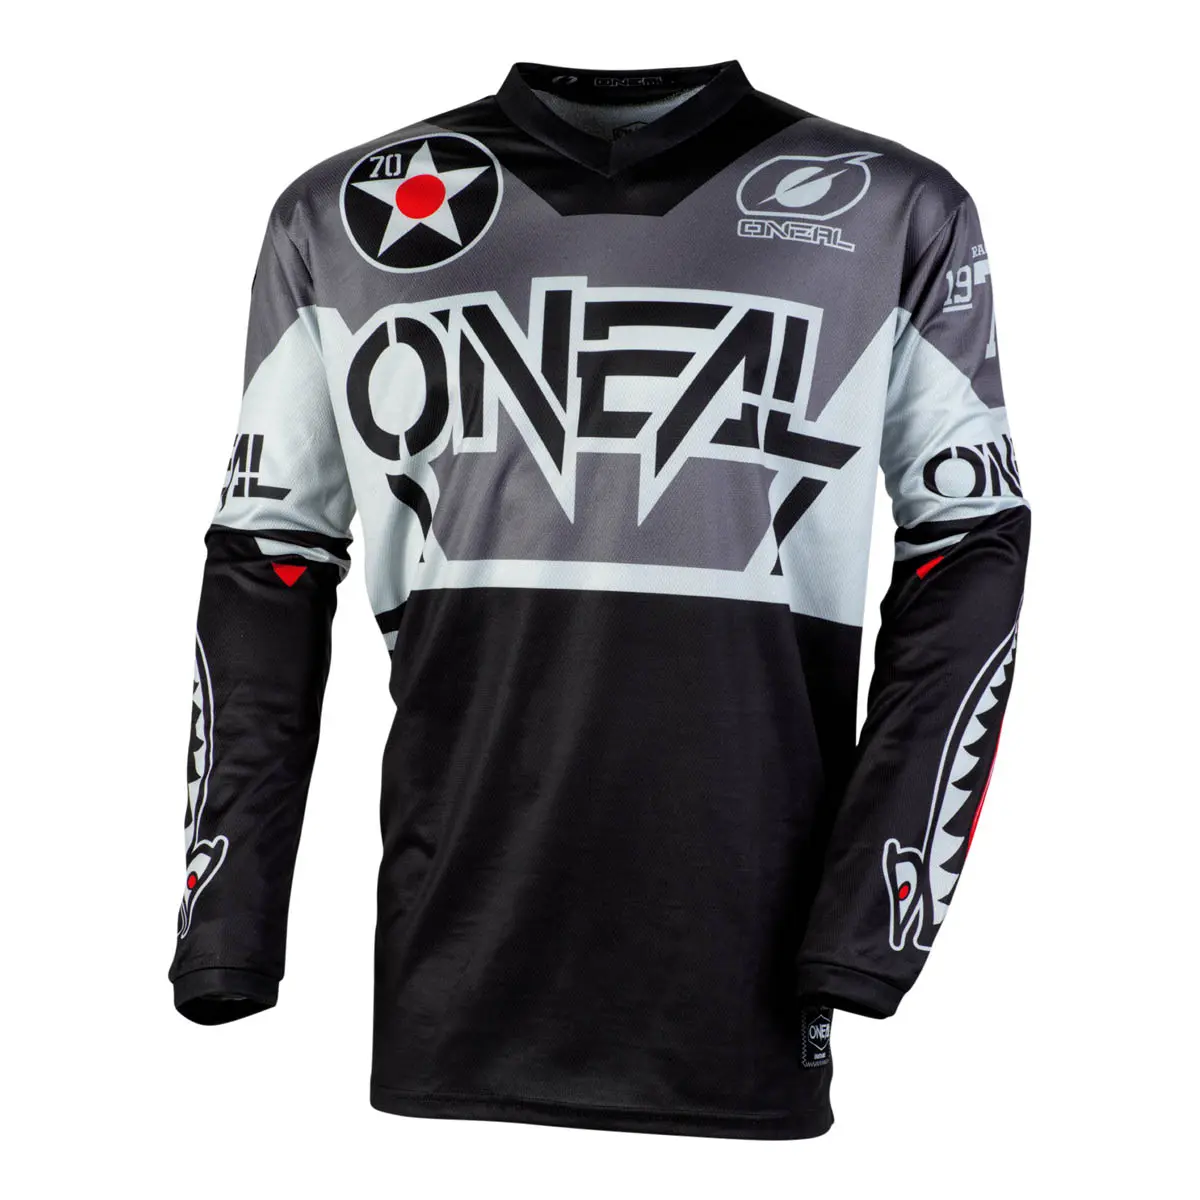 2020_ONeal_ELEMENT_Jersey_WARHAWK_black_gray_front